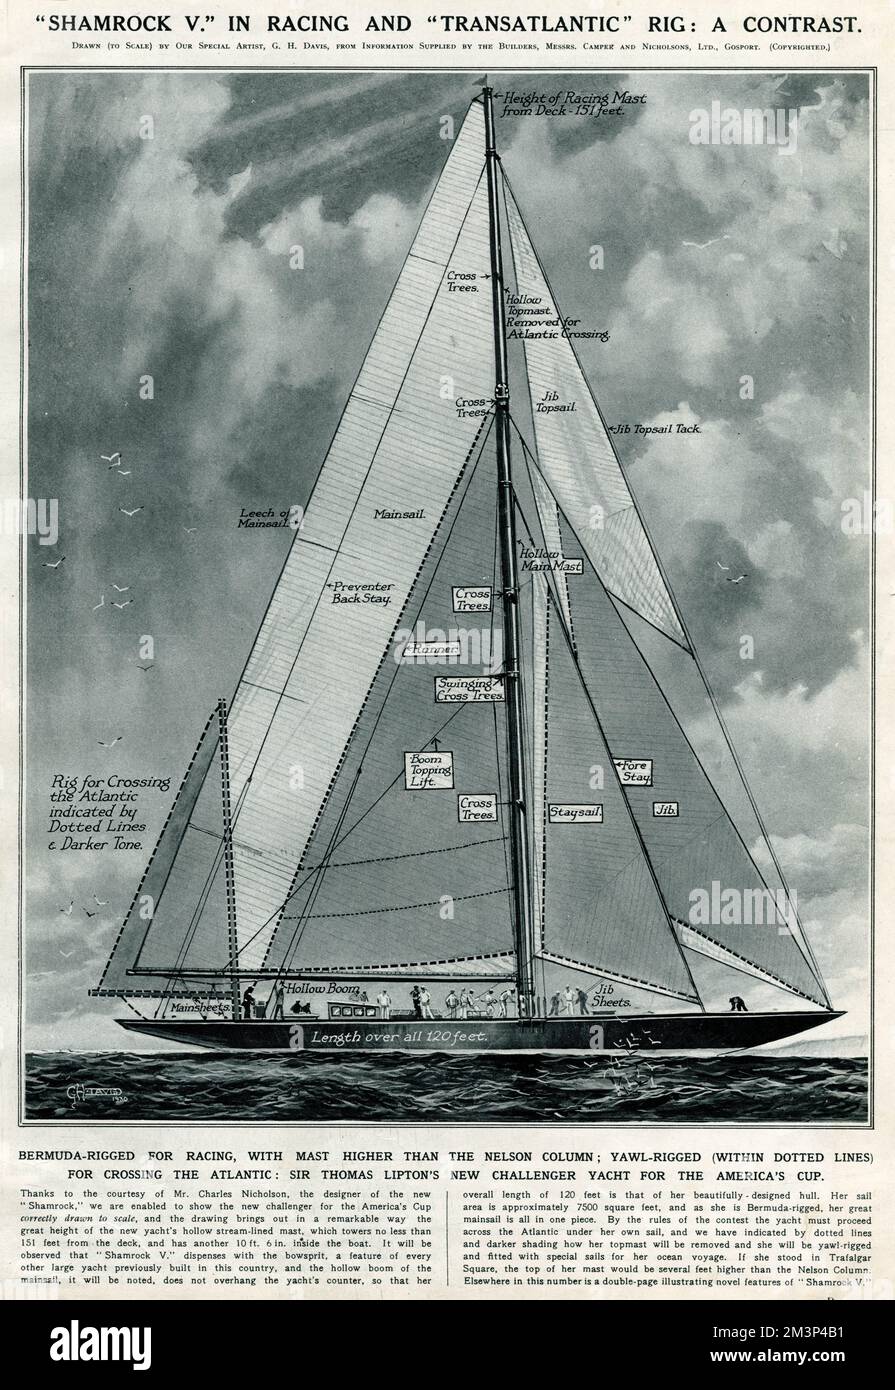 A diagram by G.H.Davis of the British Americas Cup challenger, Shamrock V, showing the difference between the configuration of the mast and sails for different sailing requirements. With the mast at full height (higher than Nelson's Column), Bermuda-rigged for racing, and (within the dotted lines) Yawl-rigged for Atlantic crossings. Owned by Sir Thomas Lipton, Shamrock V was defeated by the American yacht Enterprise in the Americas Cup races.     Date: 1930 Stock Photo